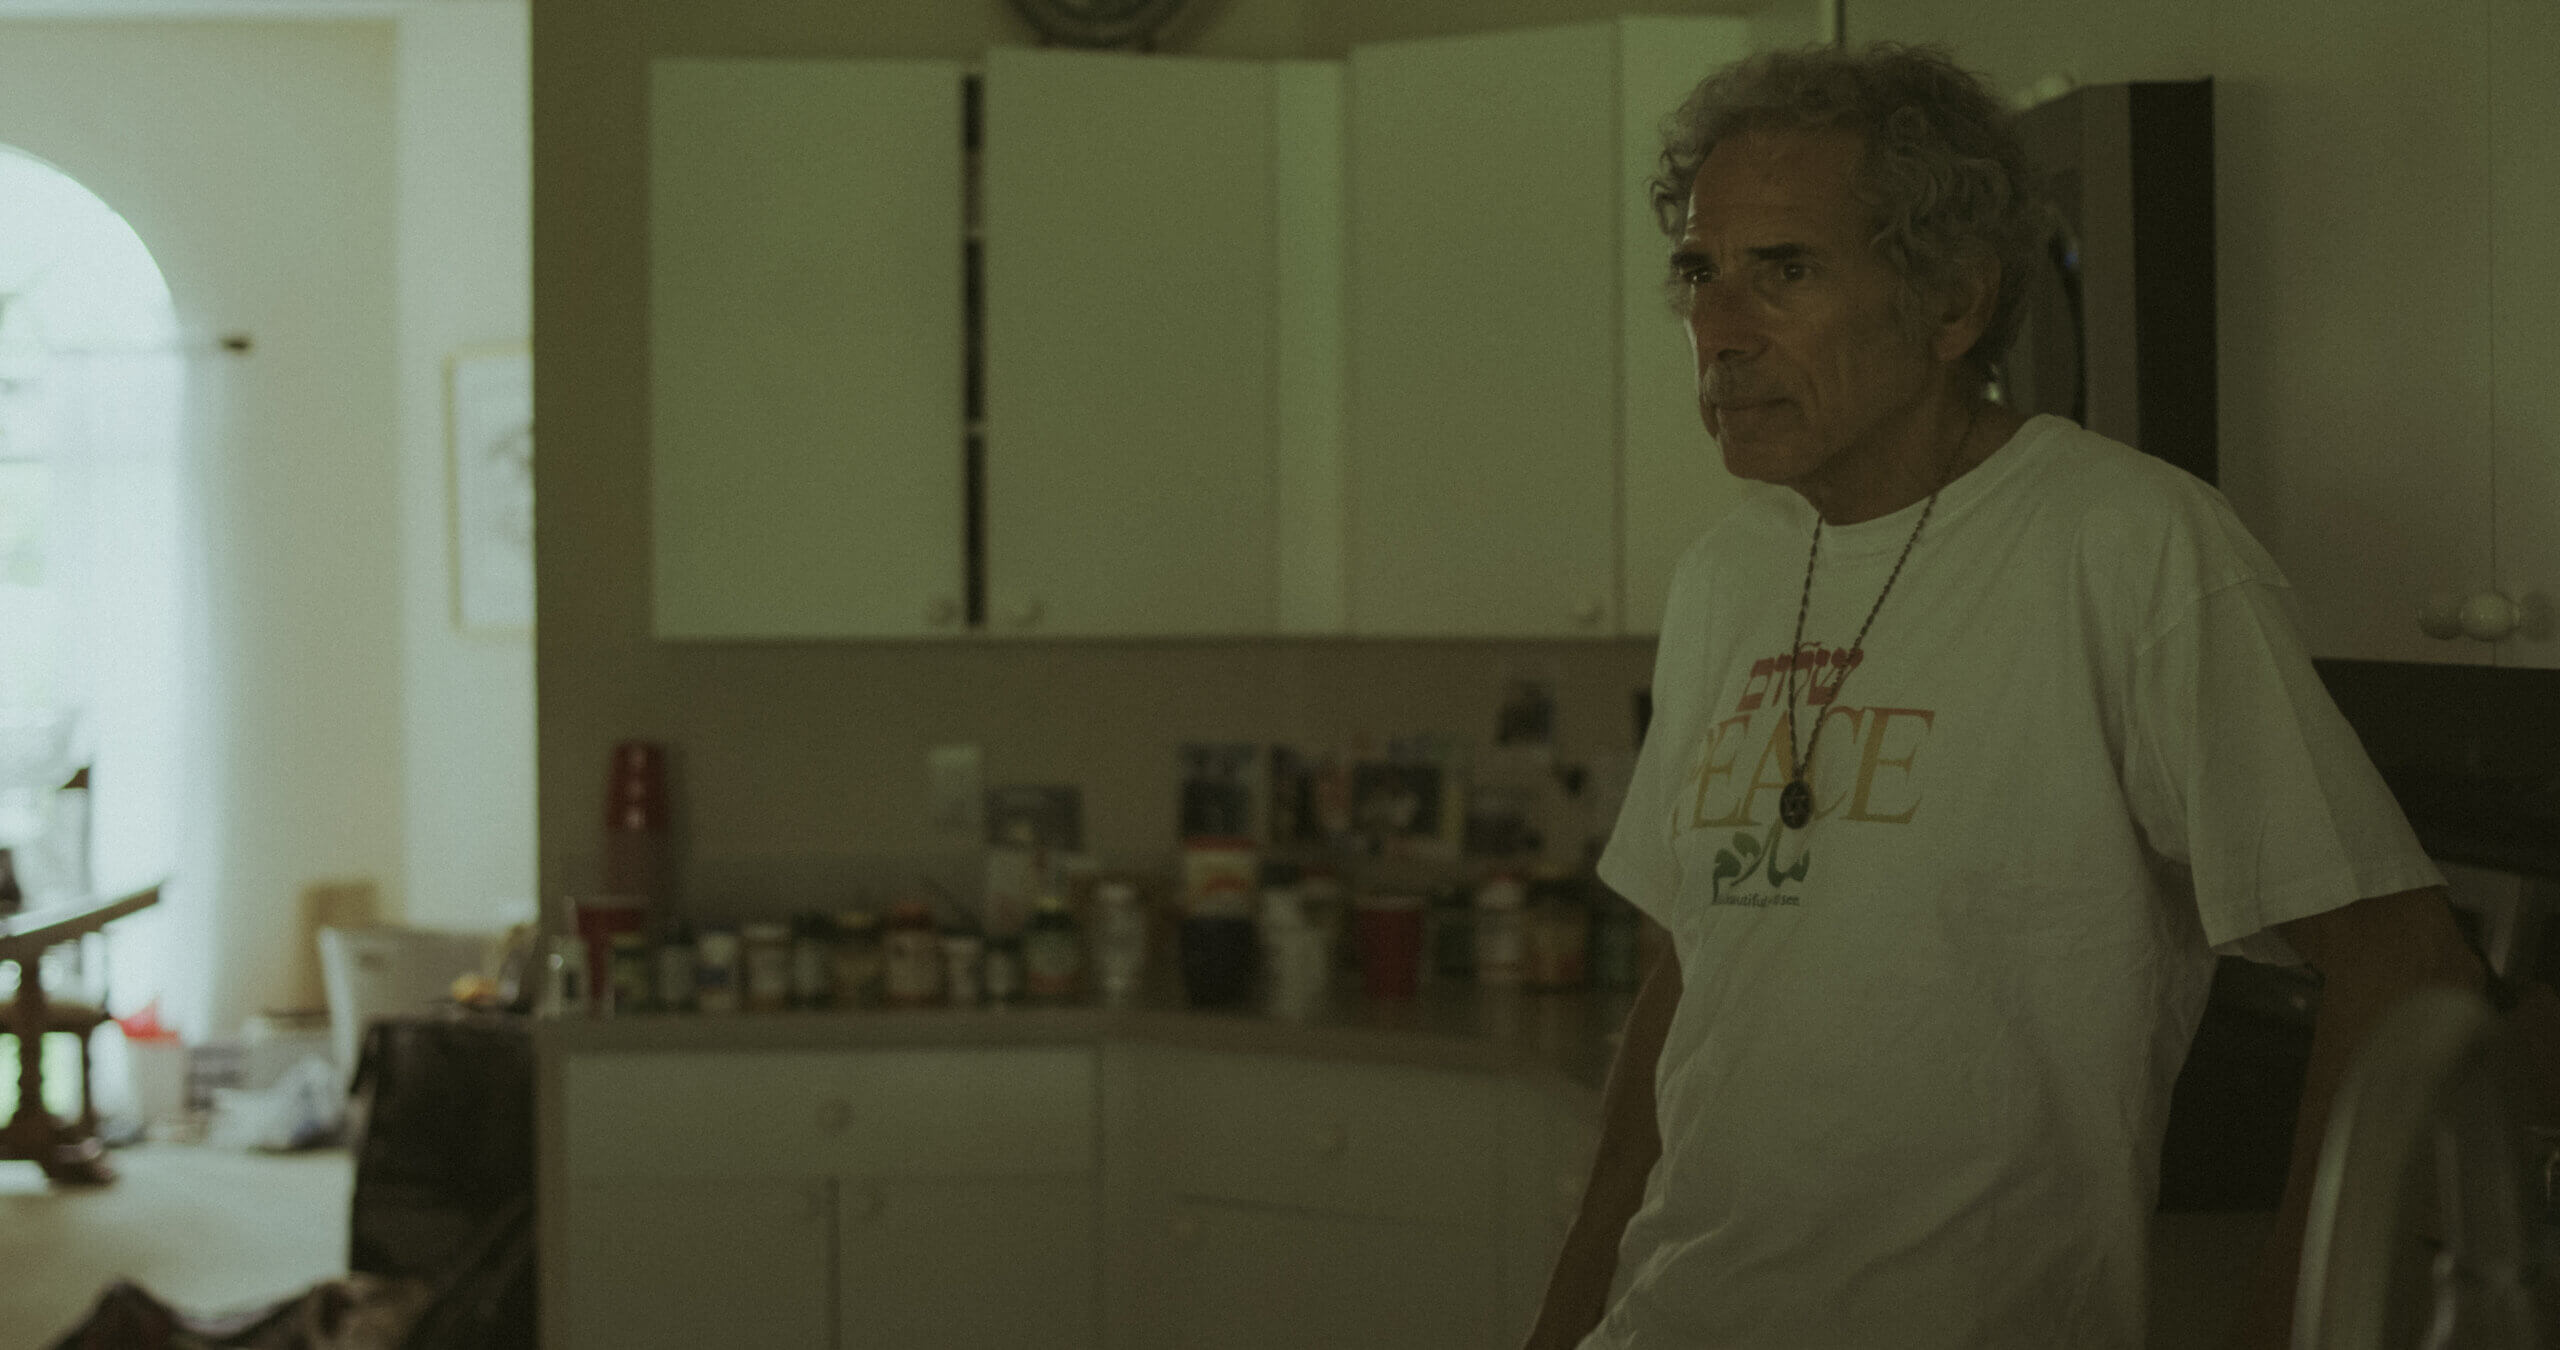 A still photo showing Rabbi Barry Silver, a pro-choice activist based in Florida, standing in a kitchen.